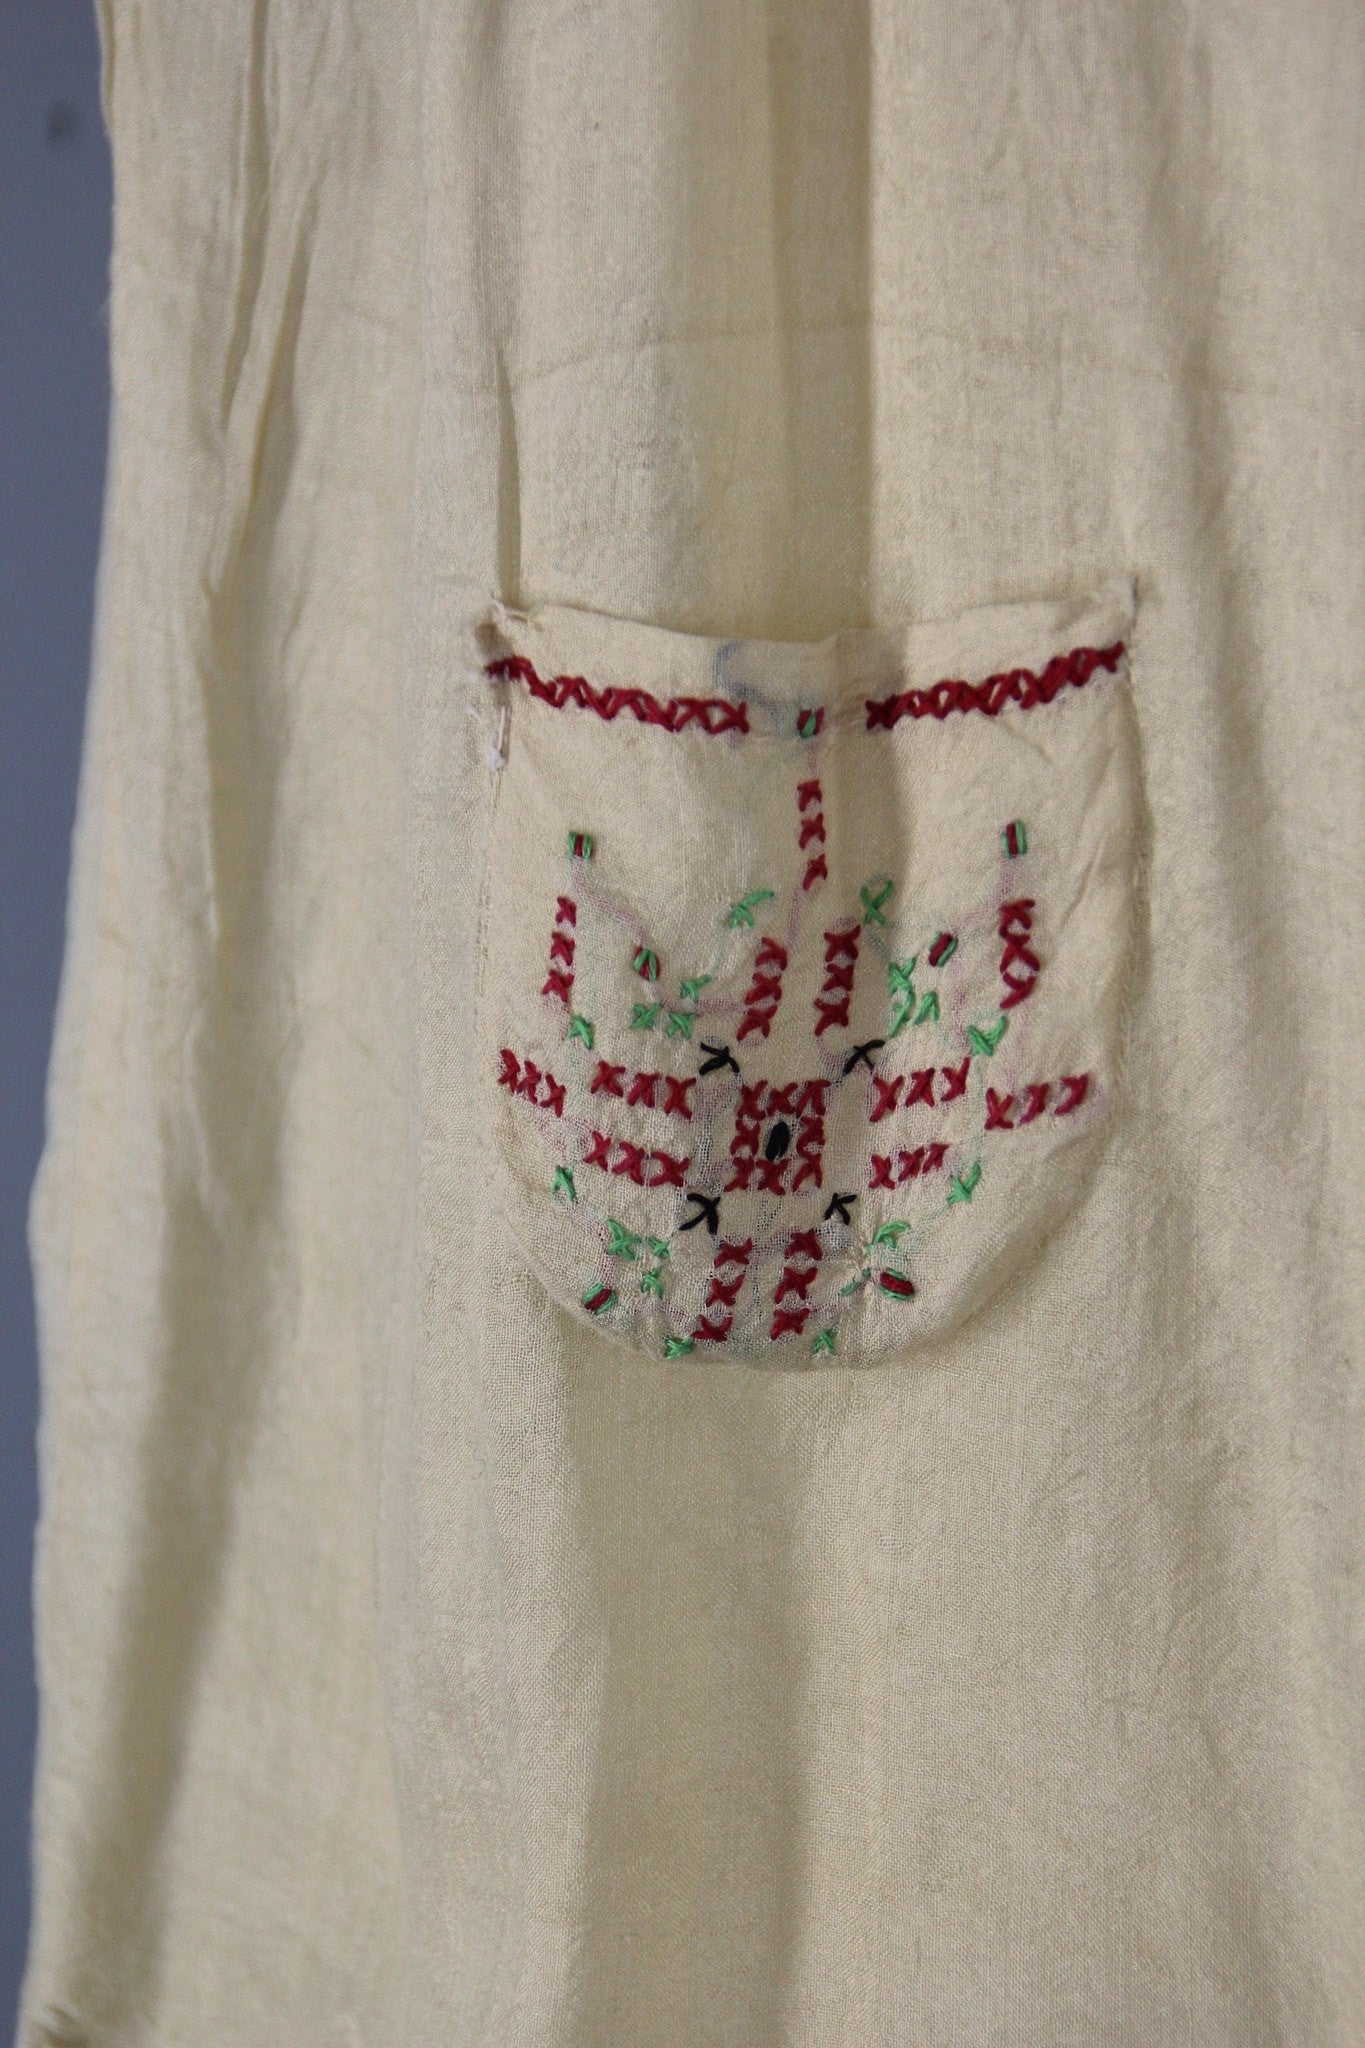 Vintage 1920s Pongee Silk Embroidered Peasant Blouse - ThisBlueBird